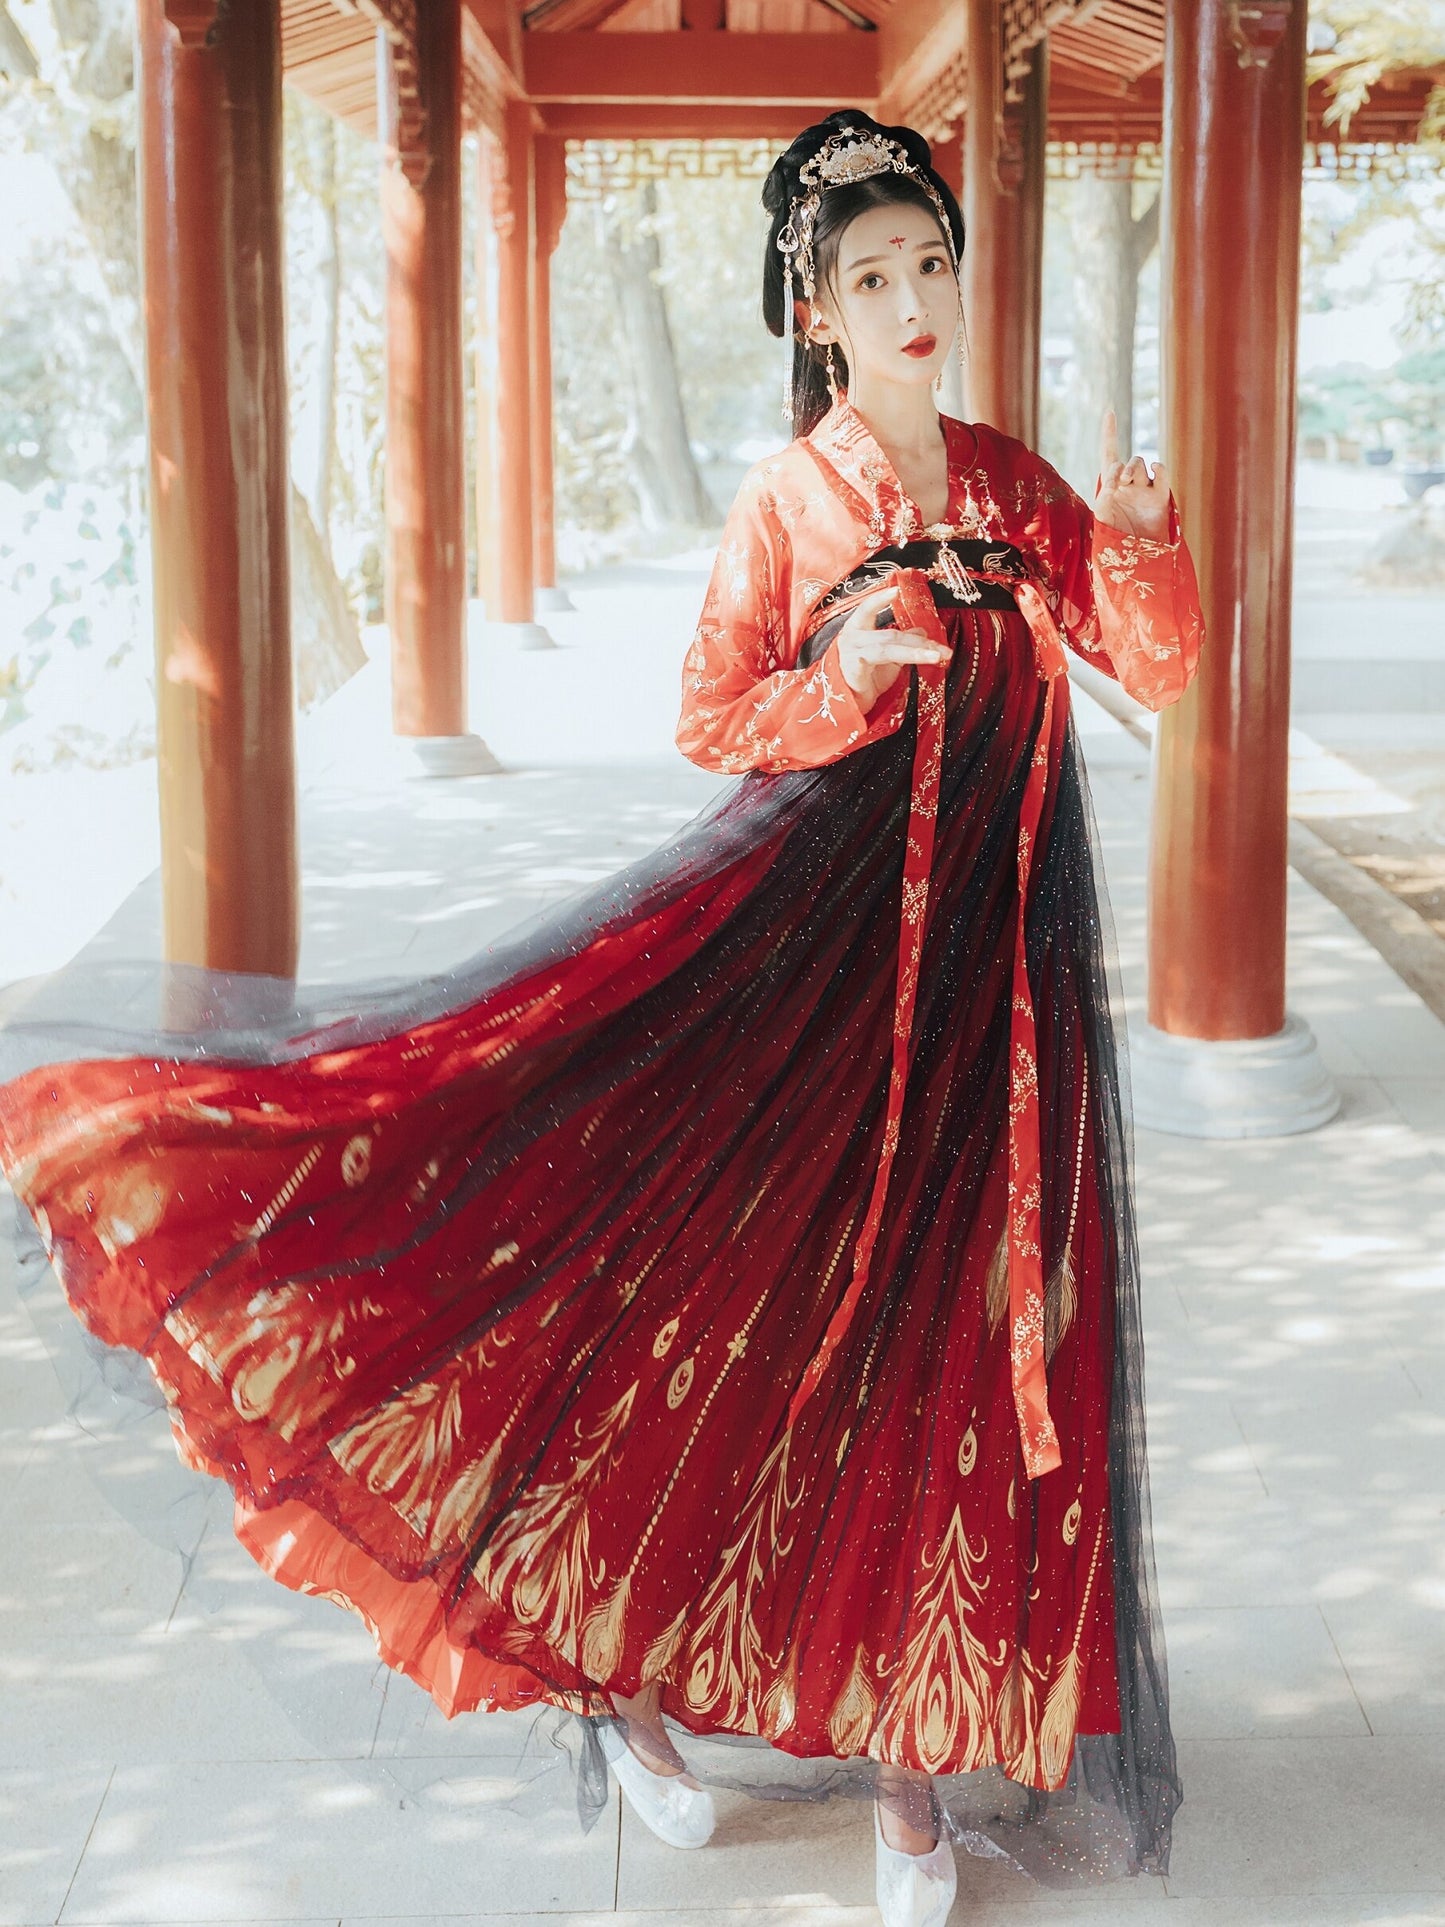 Hanfu Women Qing Dynasty Costumes Ancient Hanfu Chinese Traditional Dress Princess Fairy Dance Clothing for Cosplay Performance